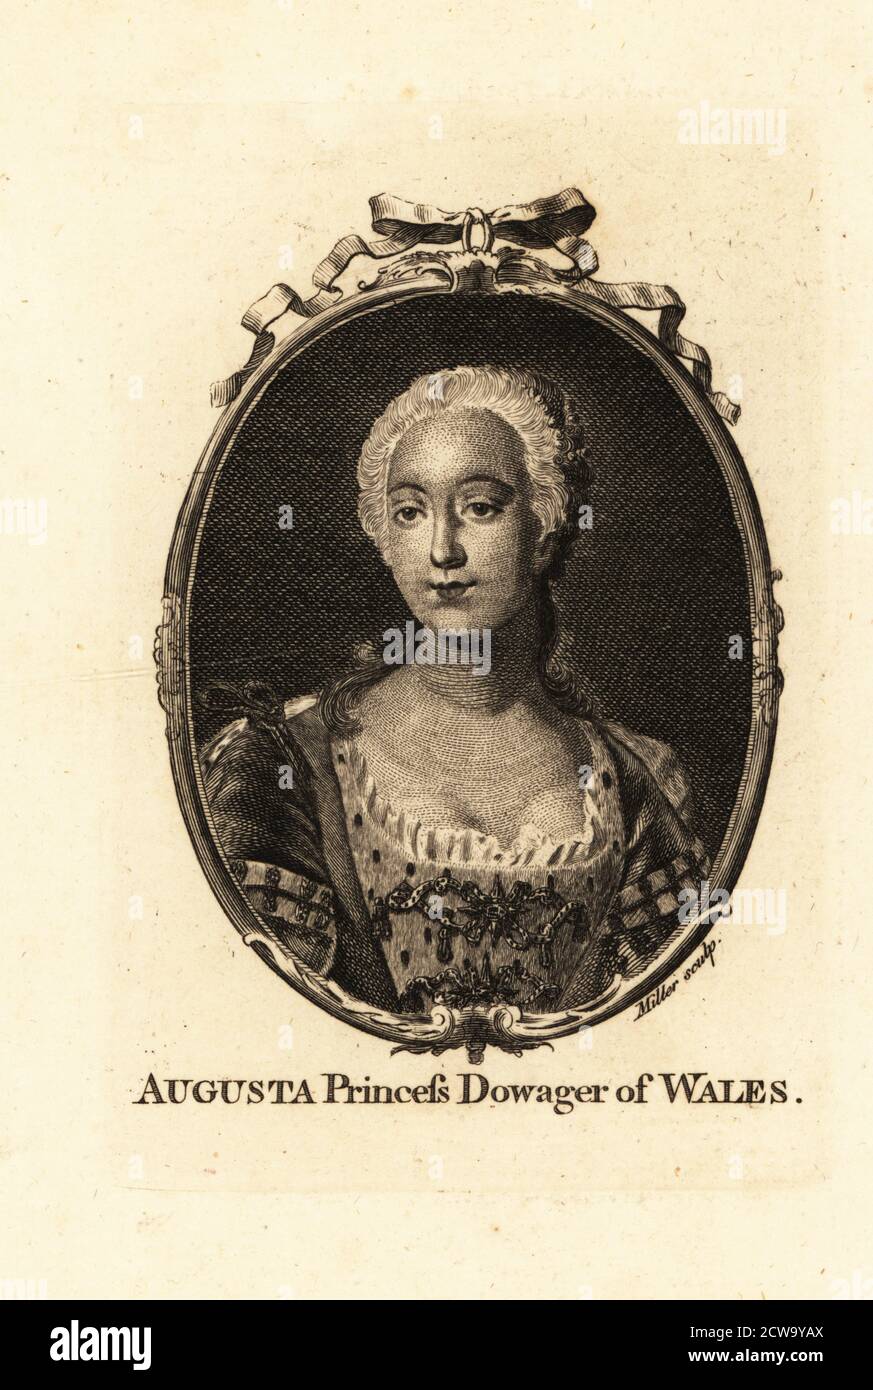 Princess Augusta of Saxe-Gotha-Altenburg (1719-1772), Princess of Wales and later Dowager Princess of Wales, mother of King George III. Oval portrait copperplate engraving by John Sebastian Miller after a painting by an unknown artist, published in London, 1790s. Stock Photo